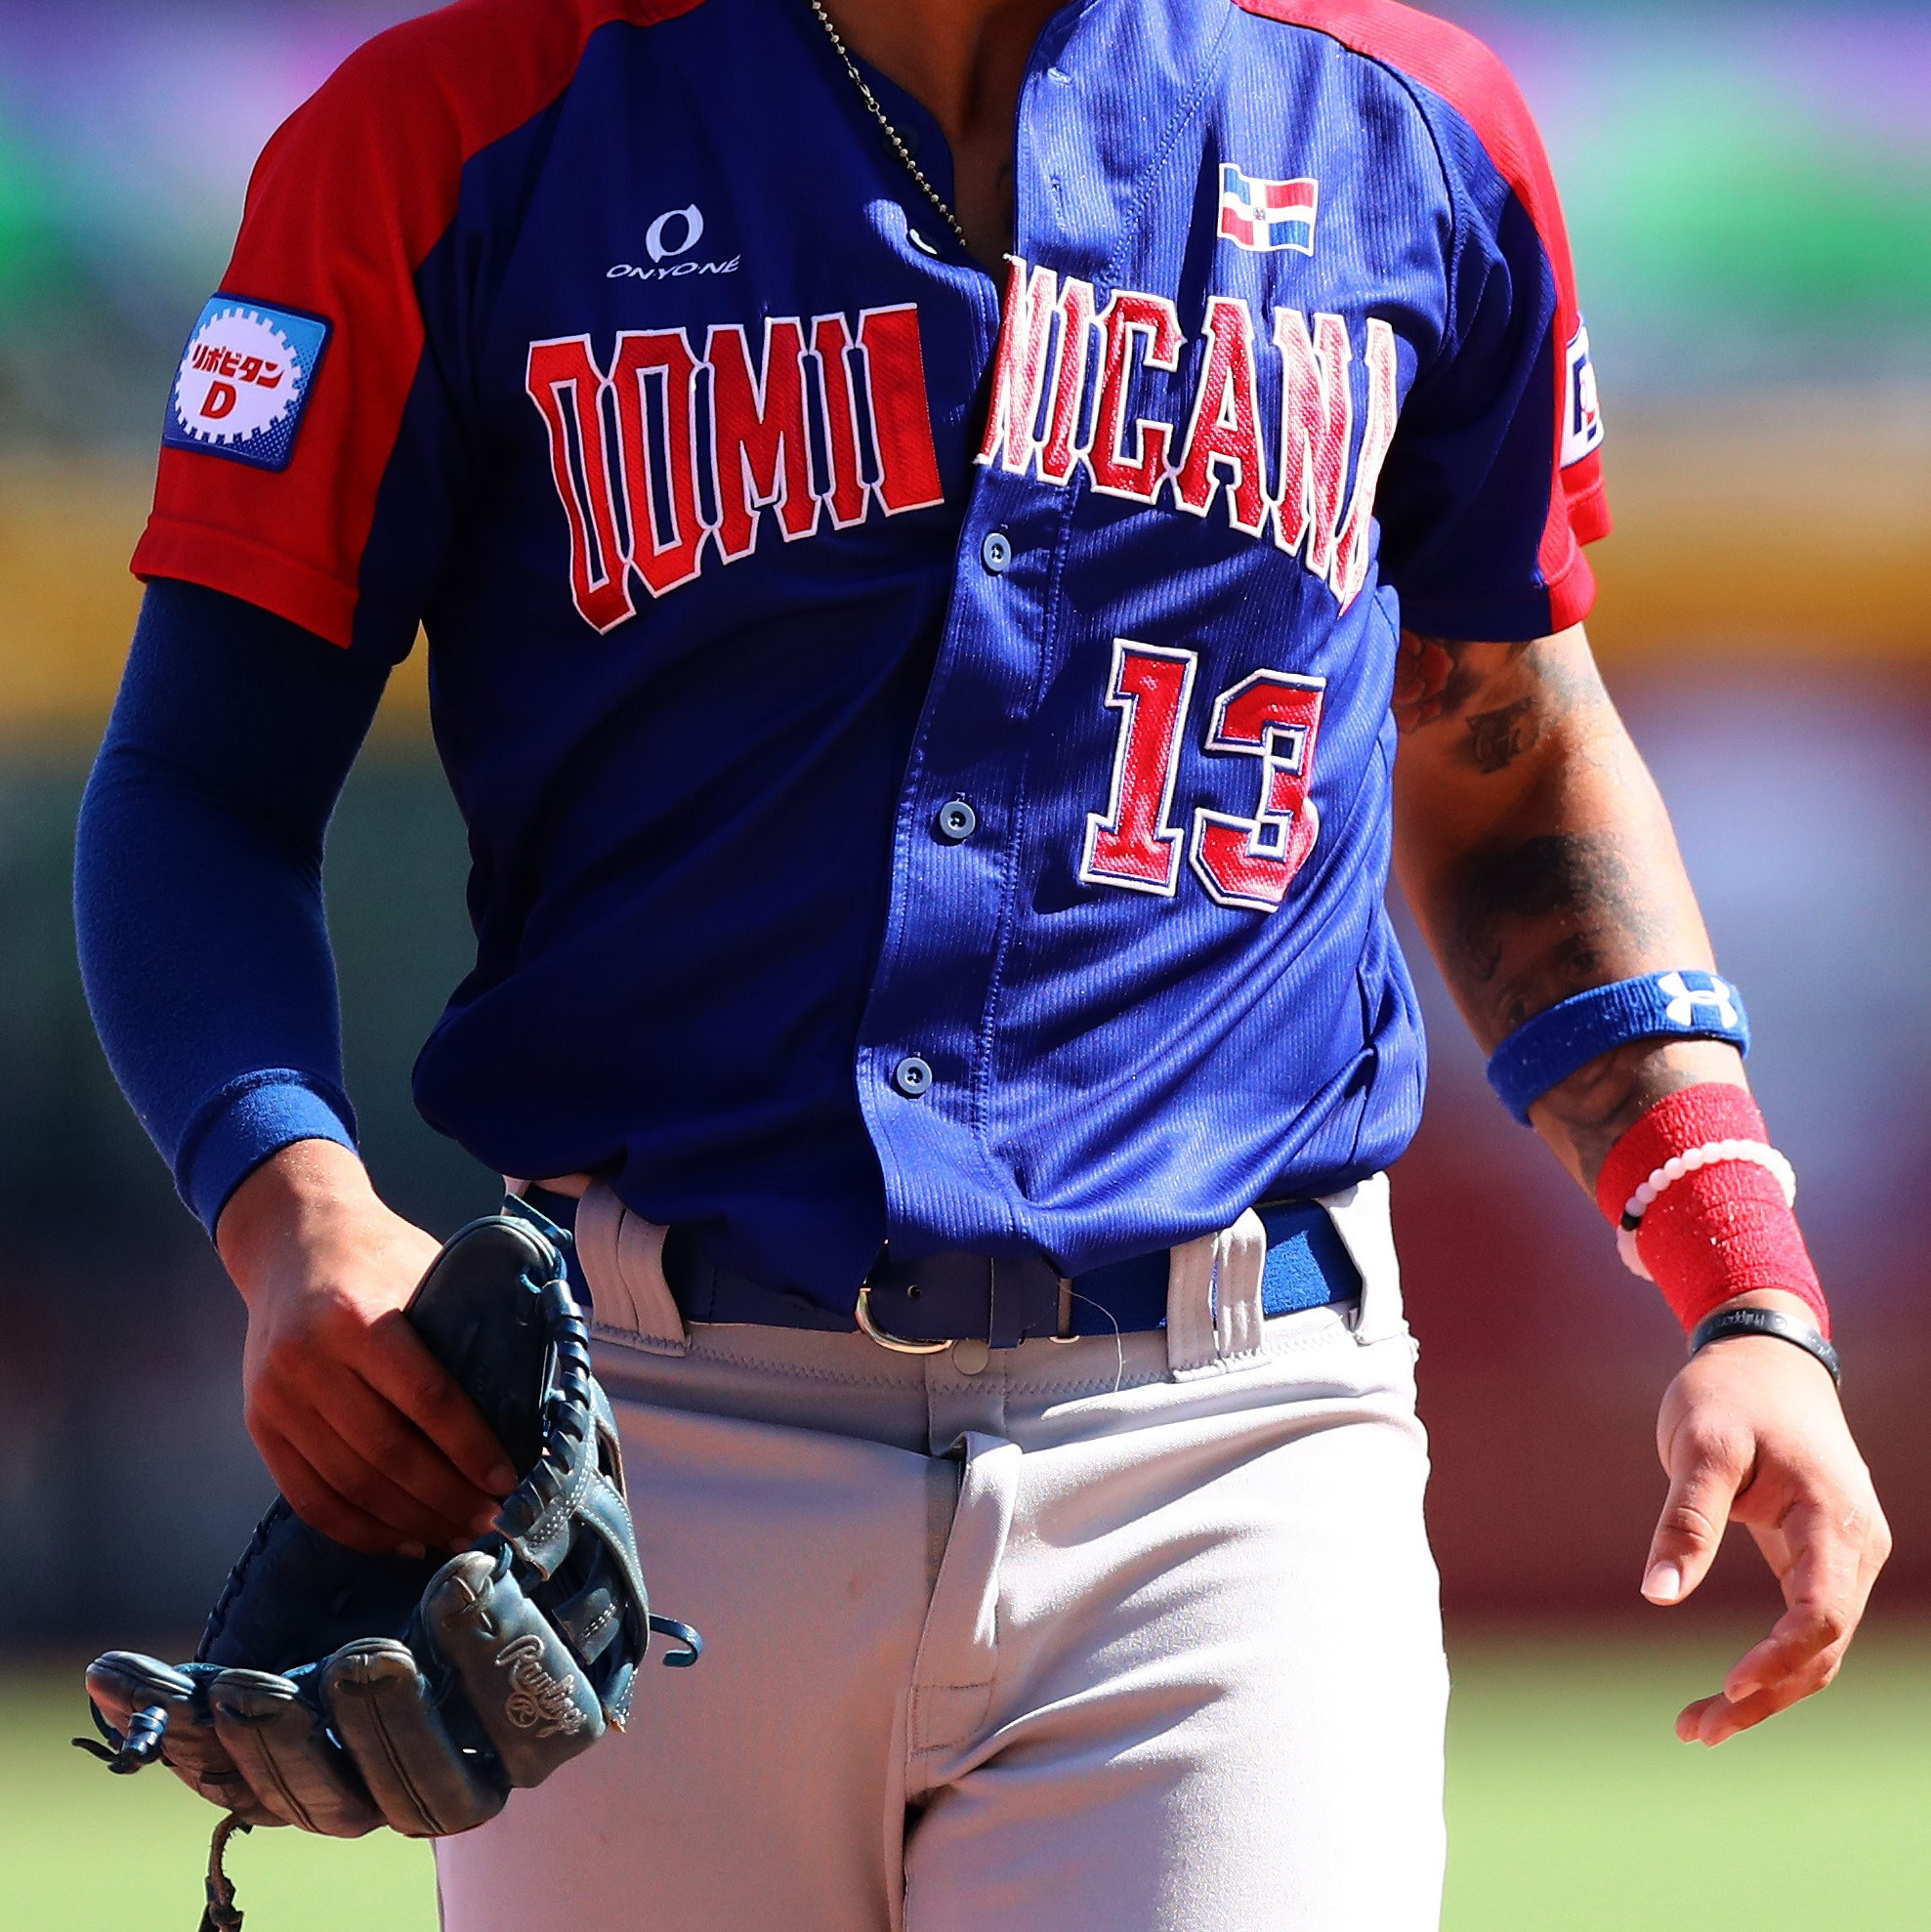 Borg to lead Dominican Republic at Americas Olympic baseball qualifier as Tatis steps aside